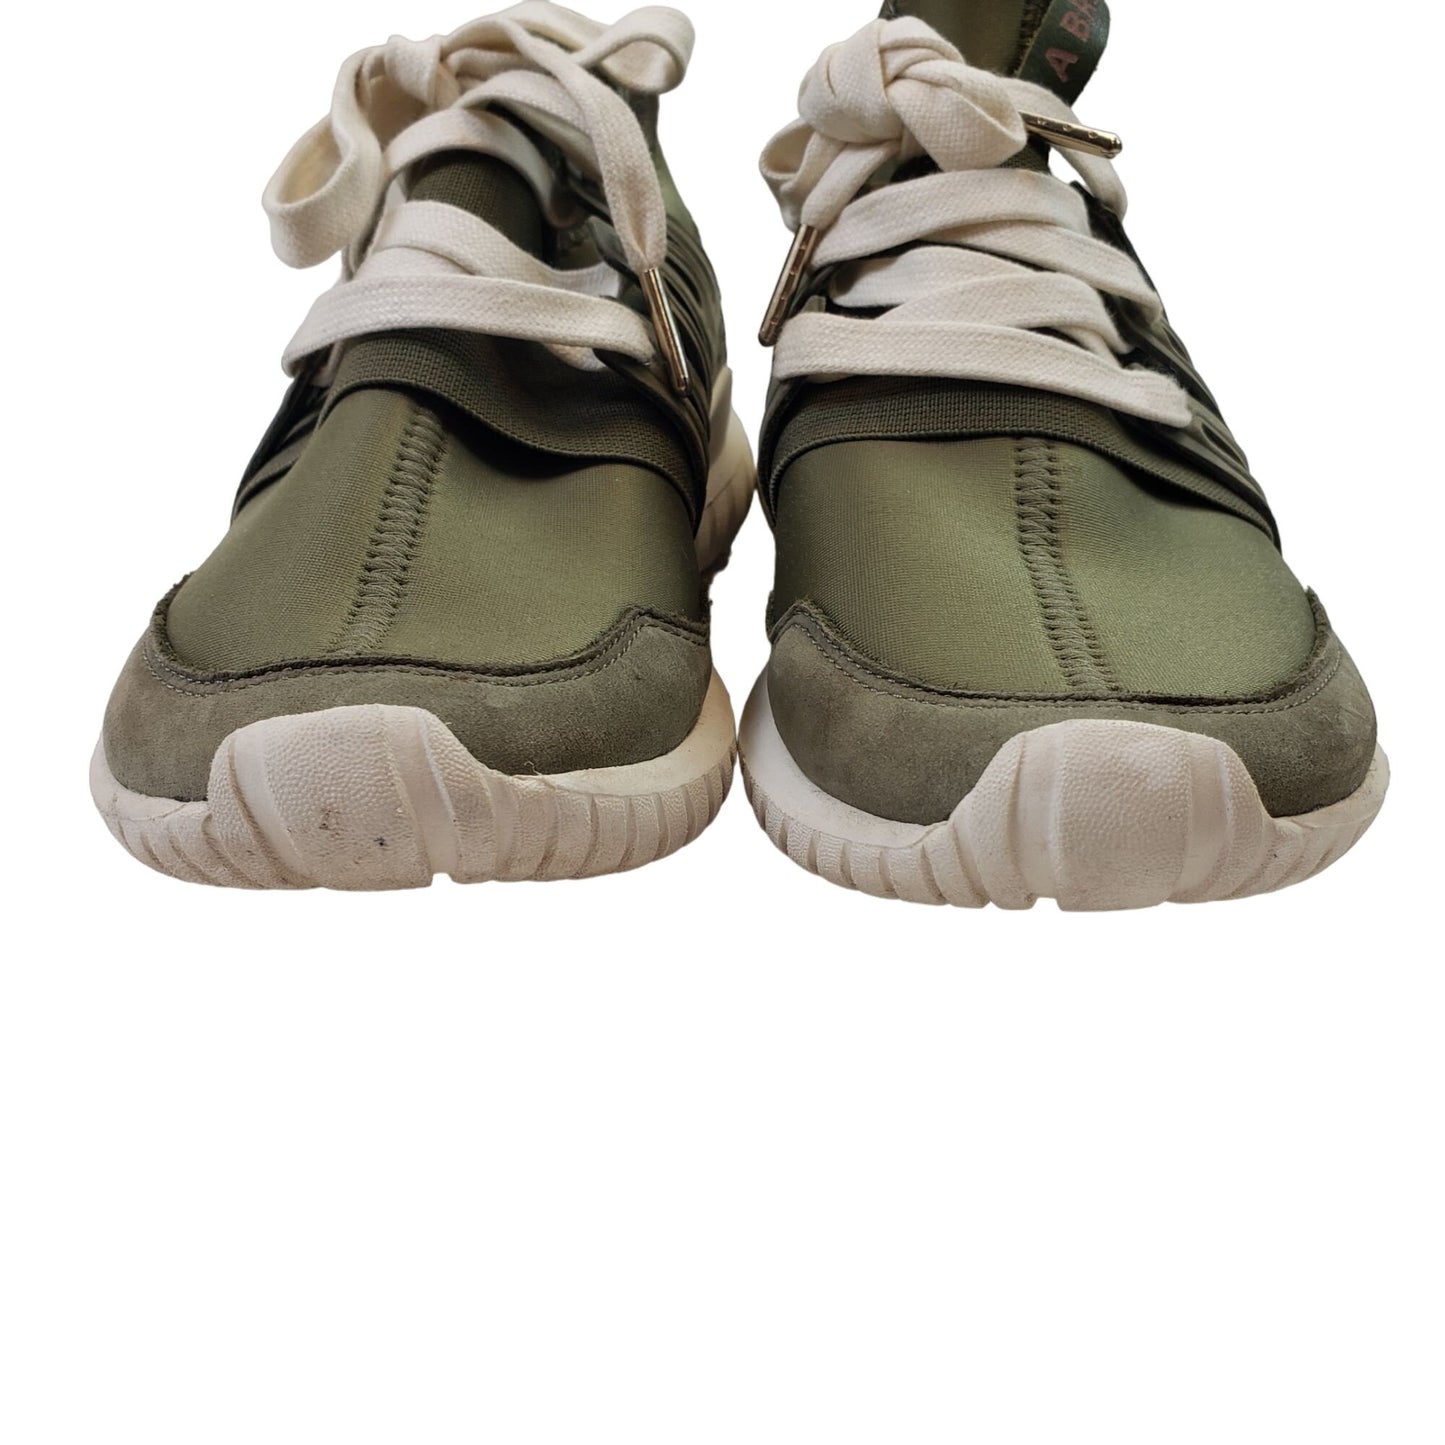 Adidas Tubular Green Running Shoes Sneakers Size 7